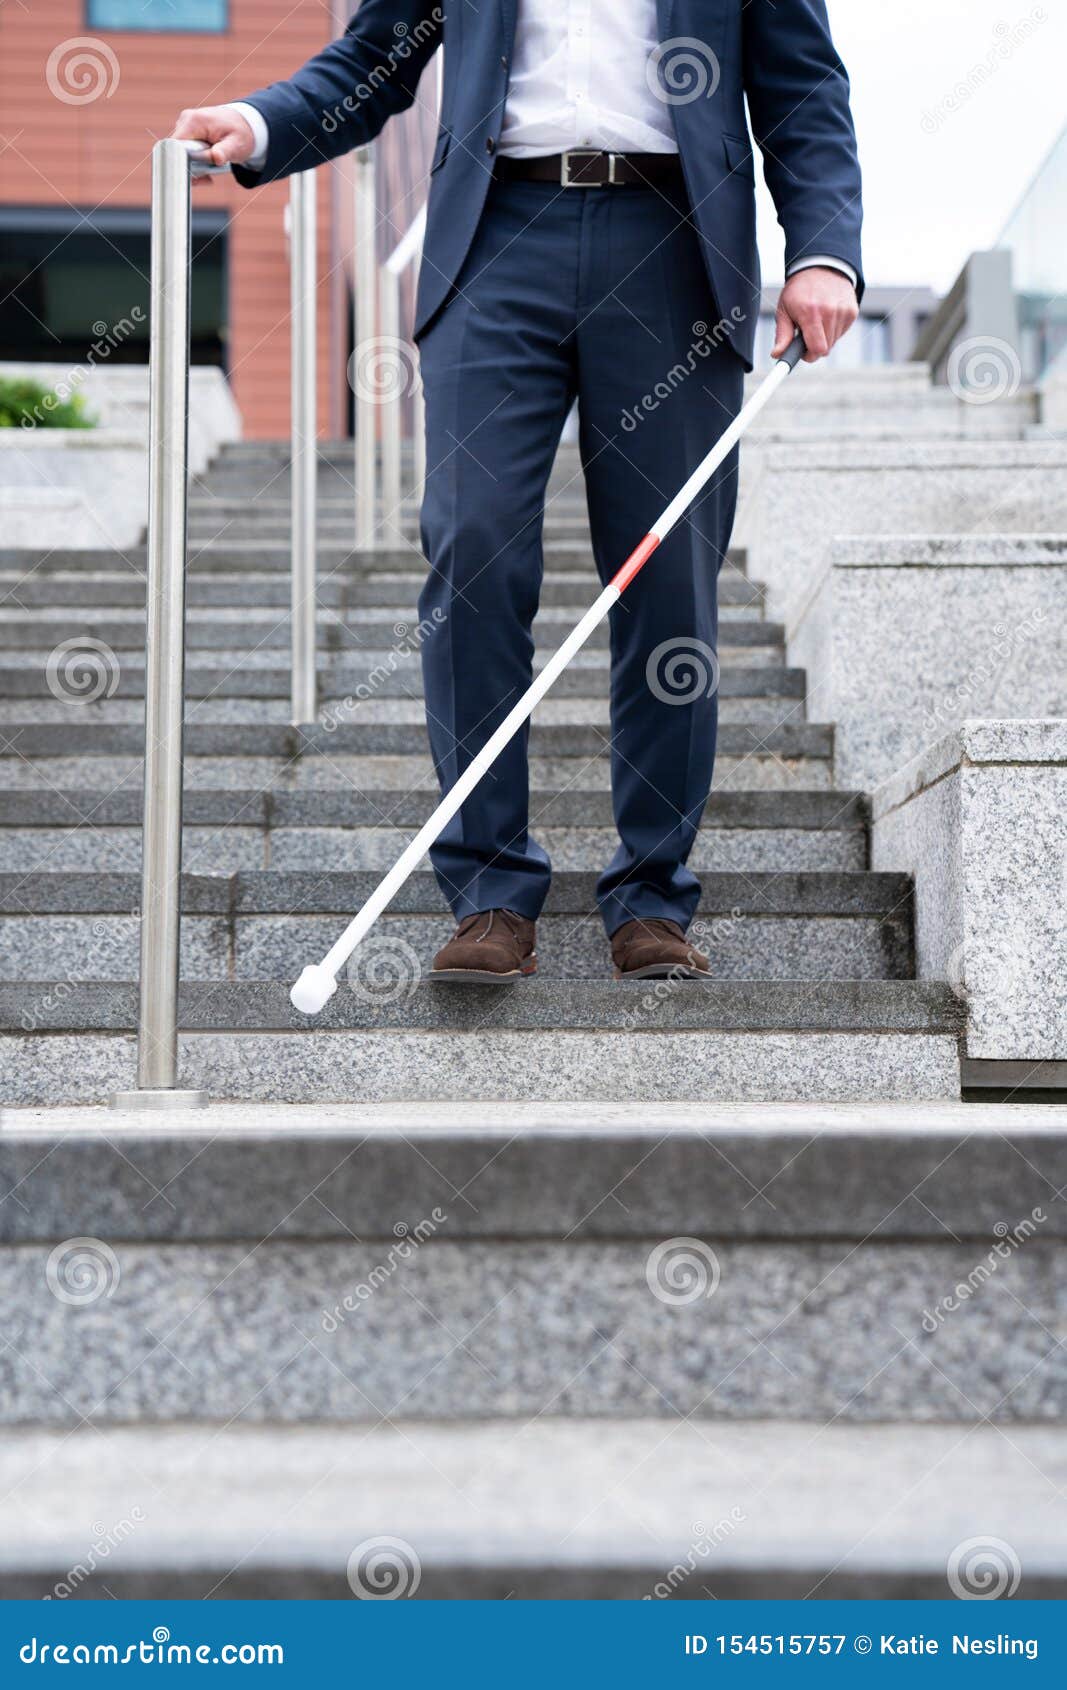 Close Up of Blind Person Negotiating Steps Outdoors Using Cane Stock Image  - Image of person, steps: 154515757